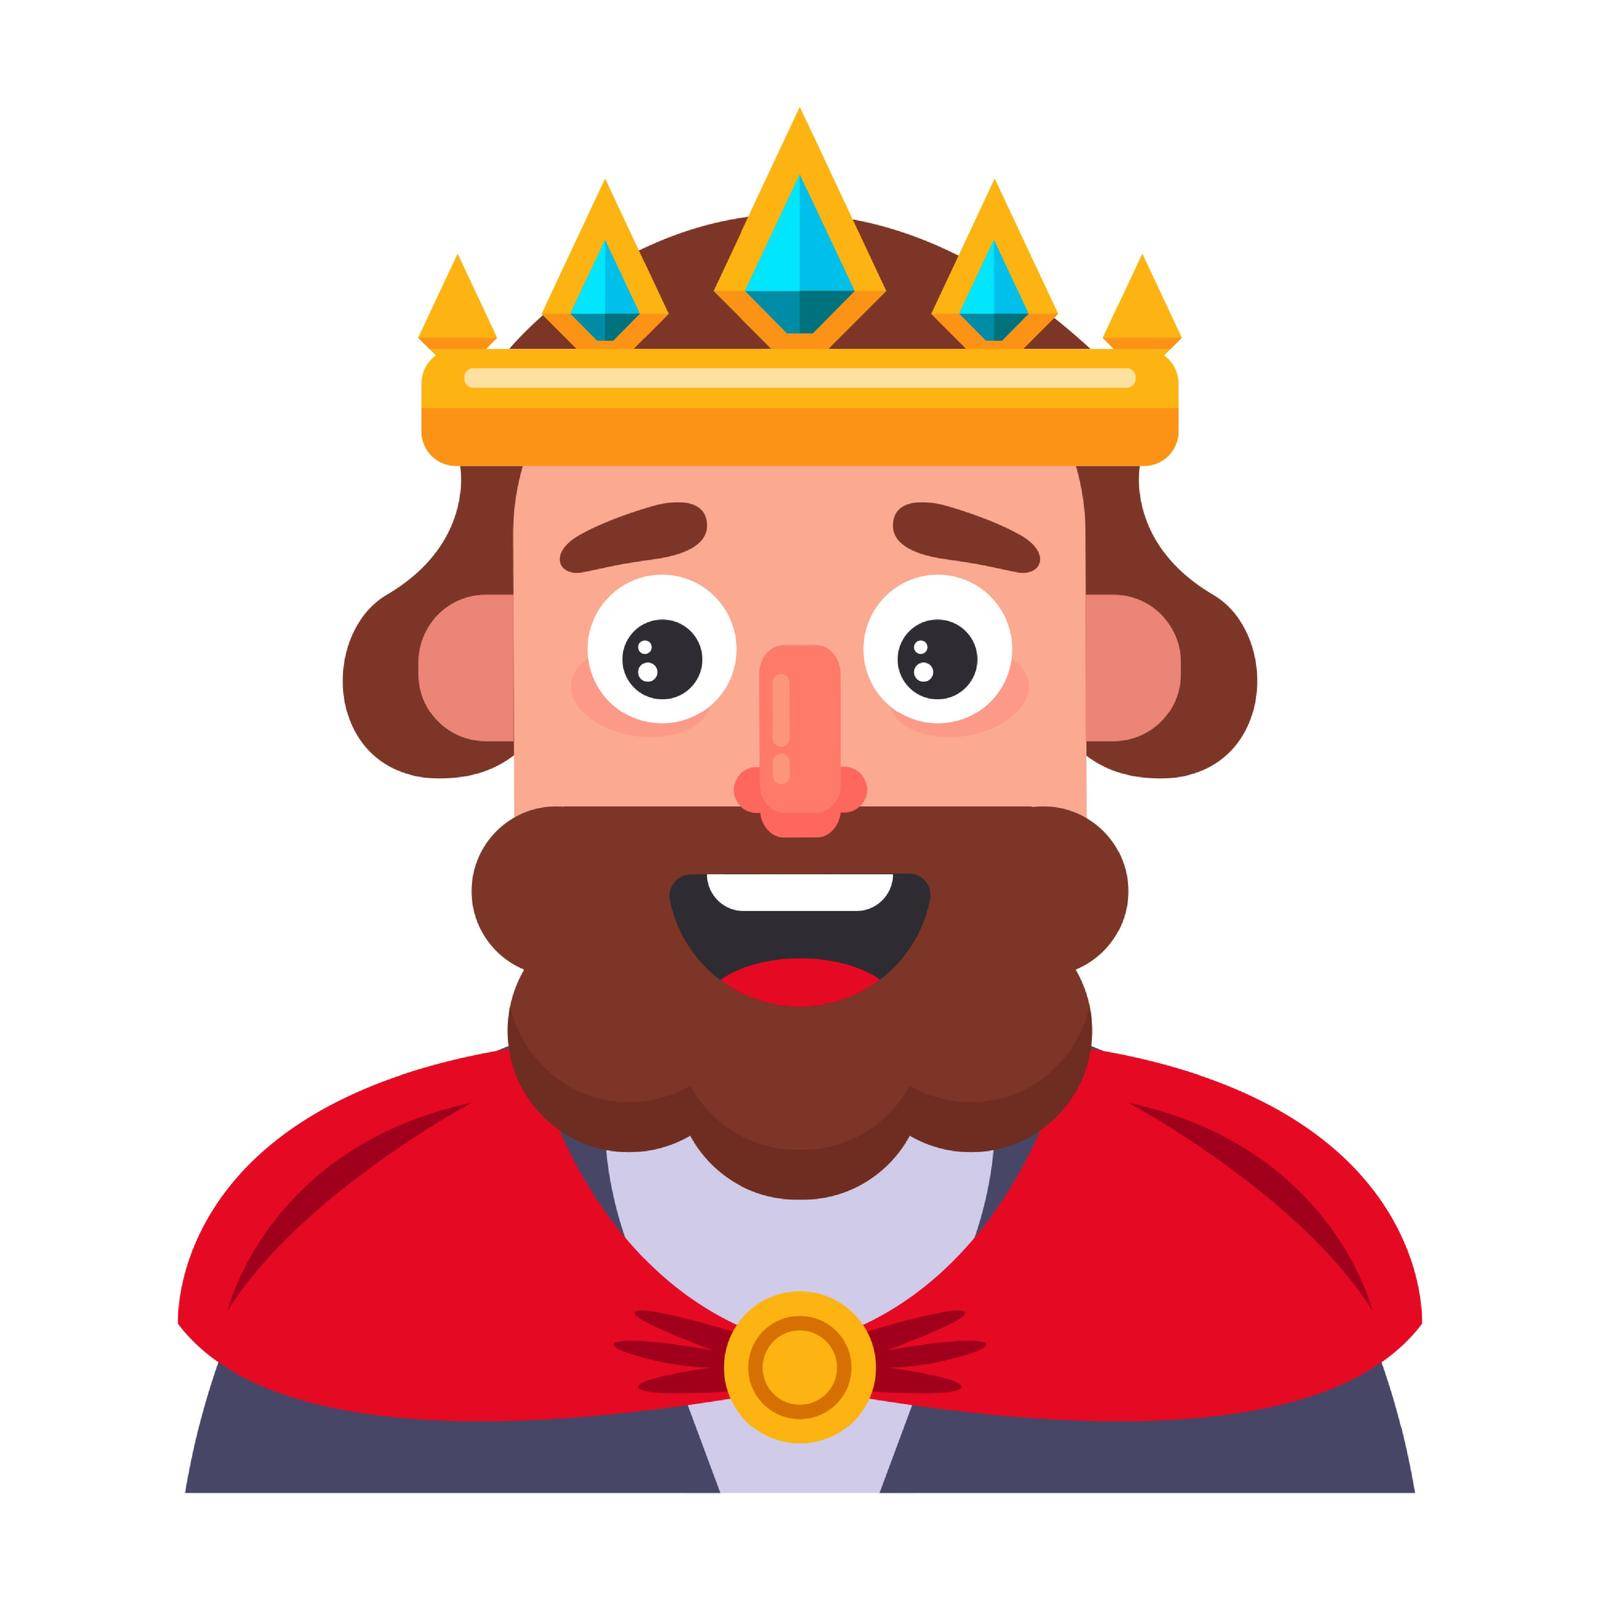 good king. crown on the head of a man. flat vector illustration.